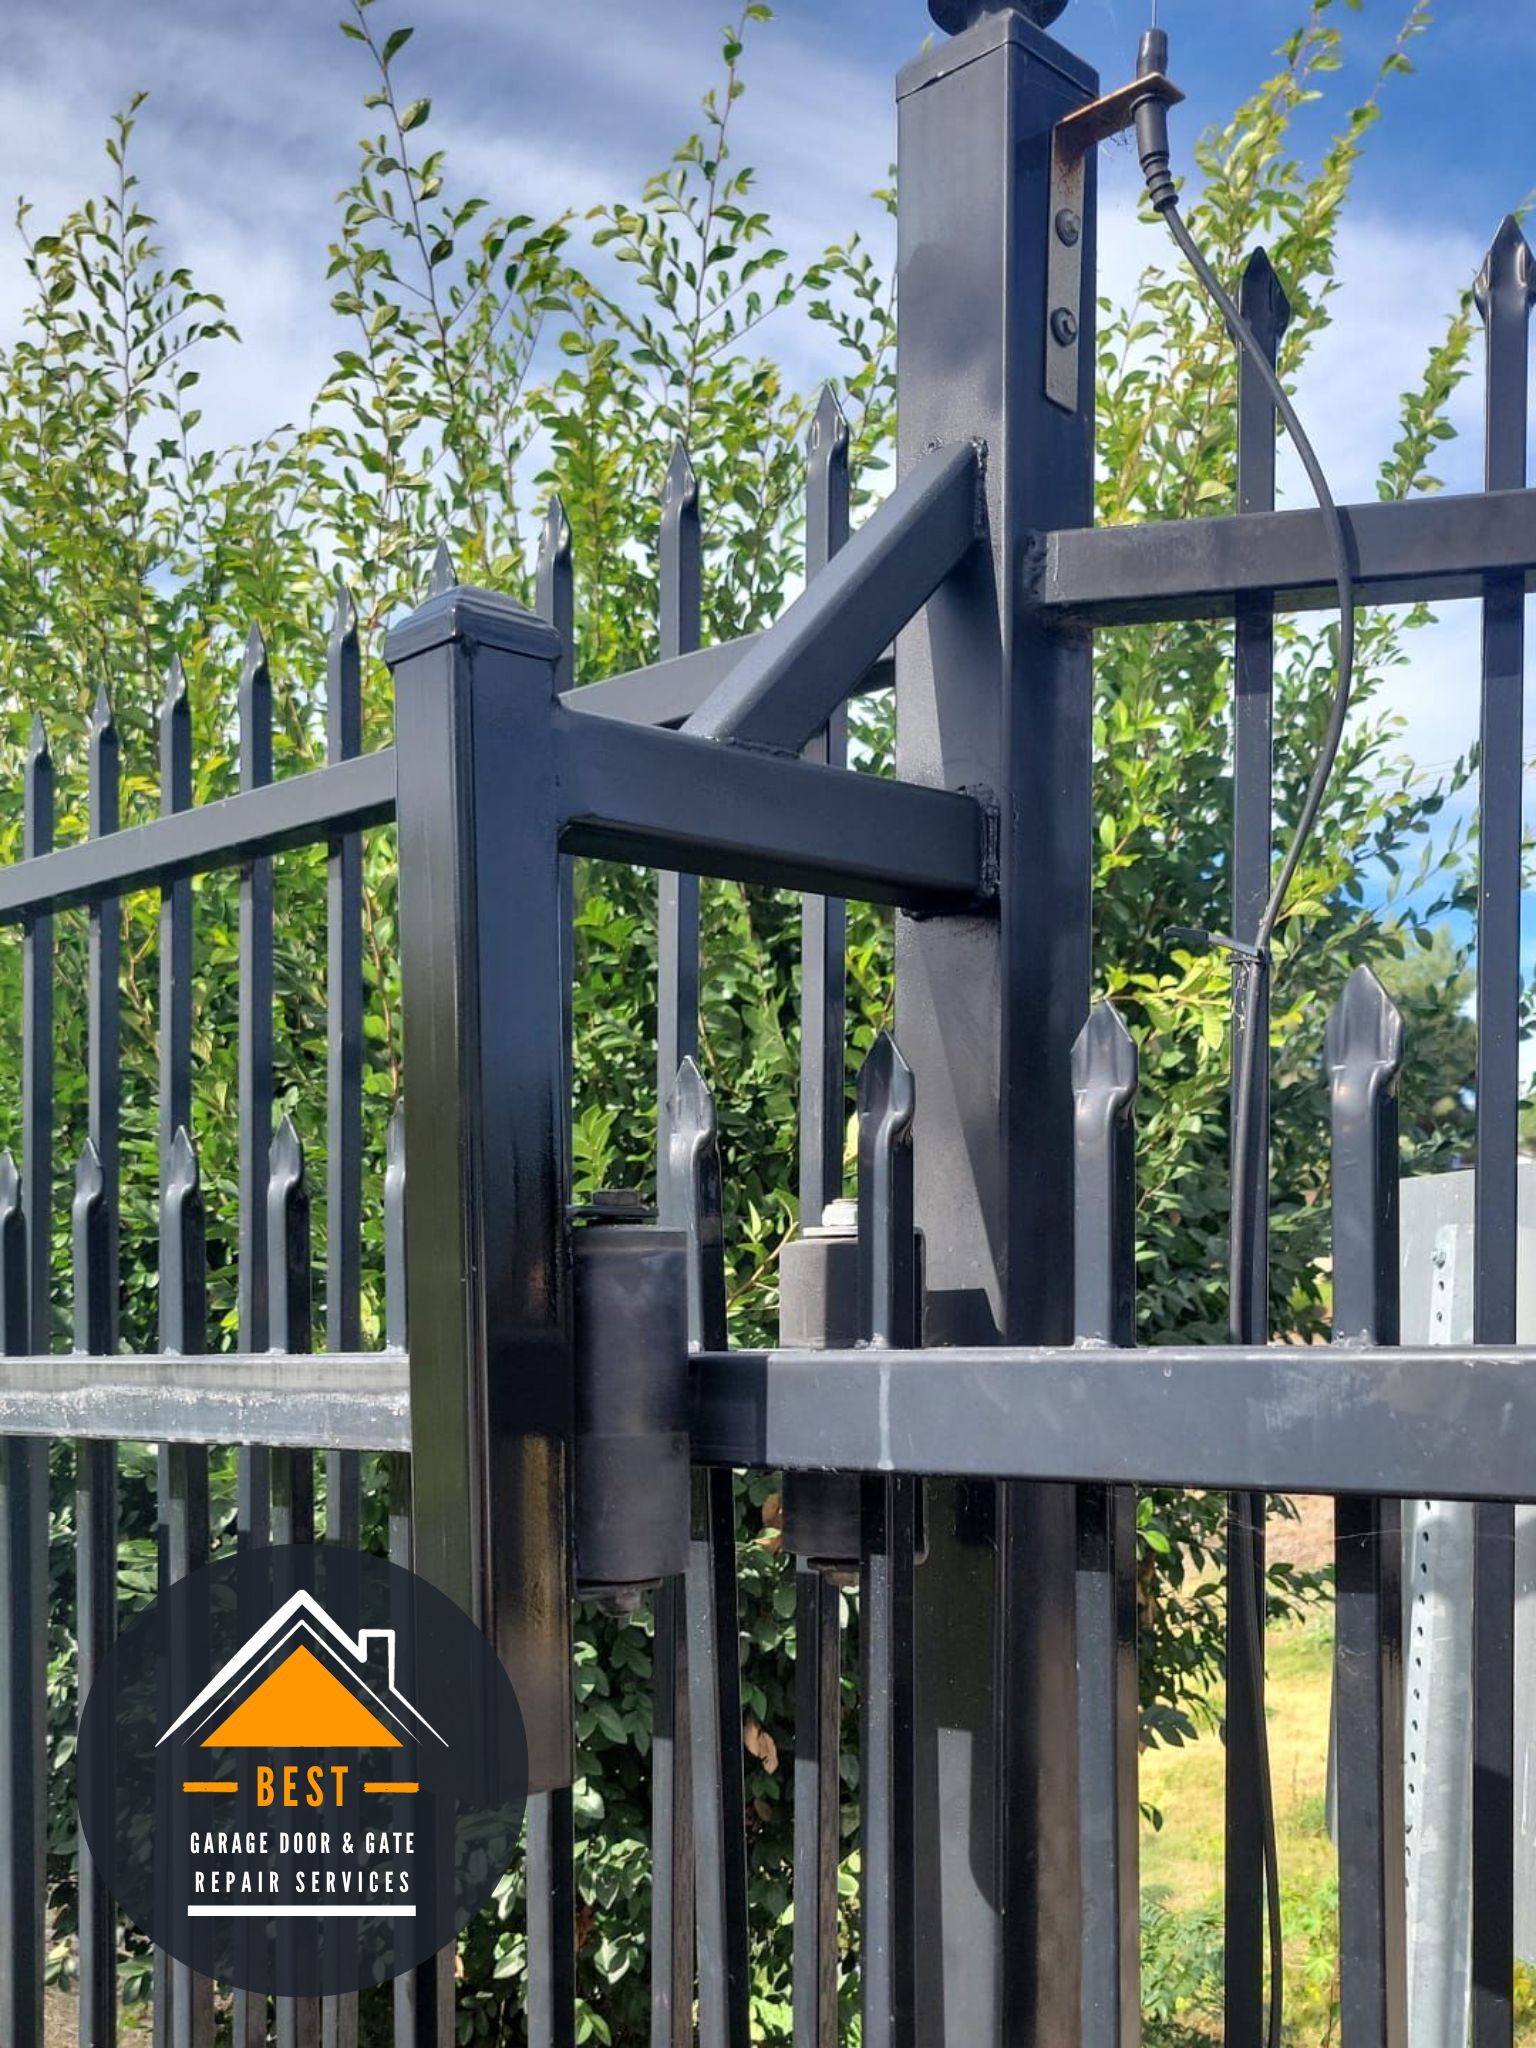 Commercial slide gate fabrication and installation for Apartment complex Rancho Laguna in El Cajon CA, 92021